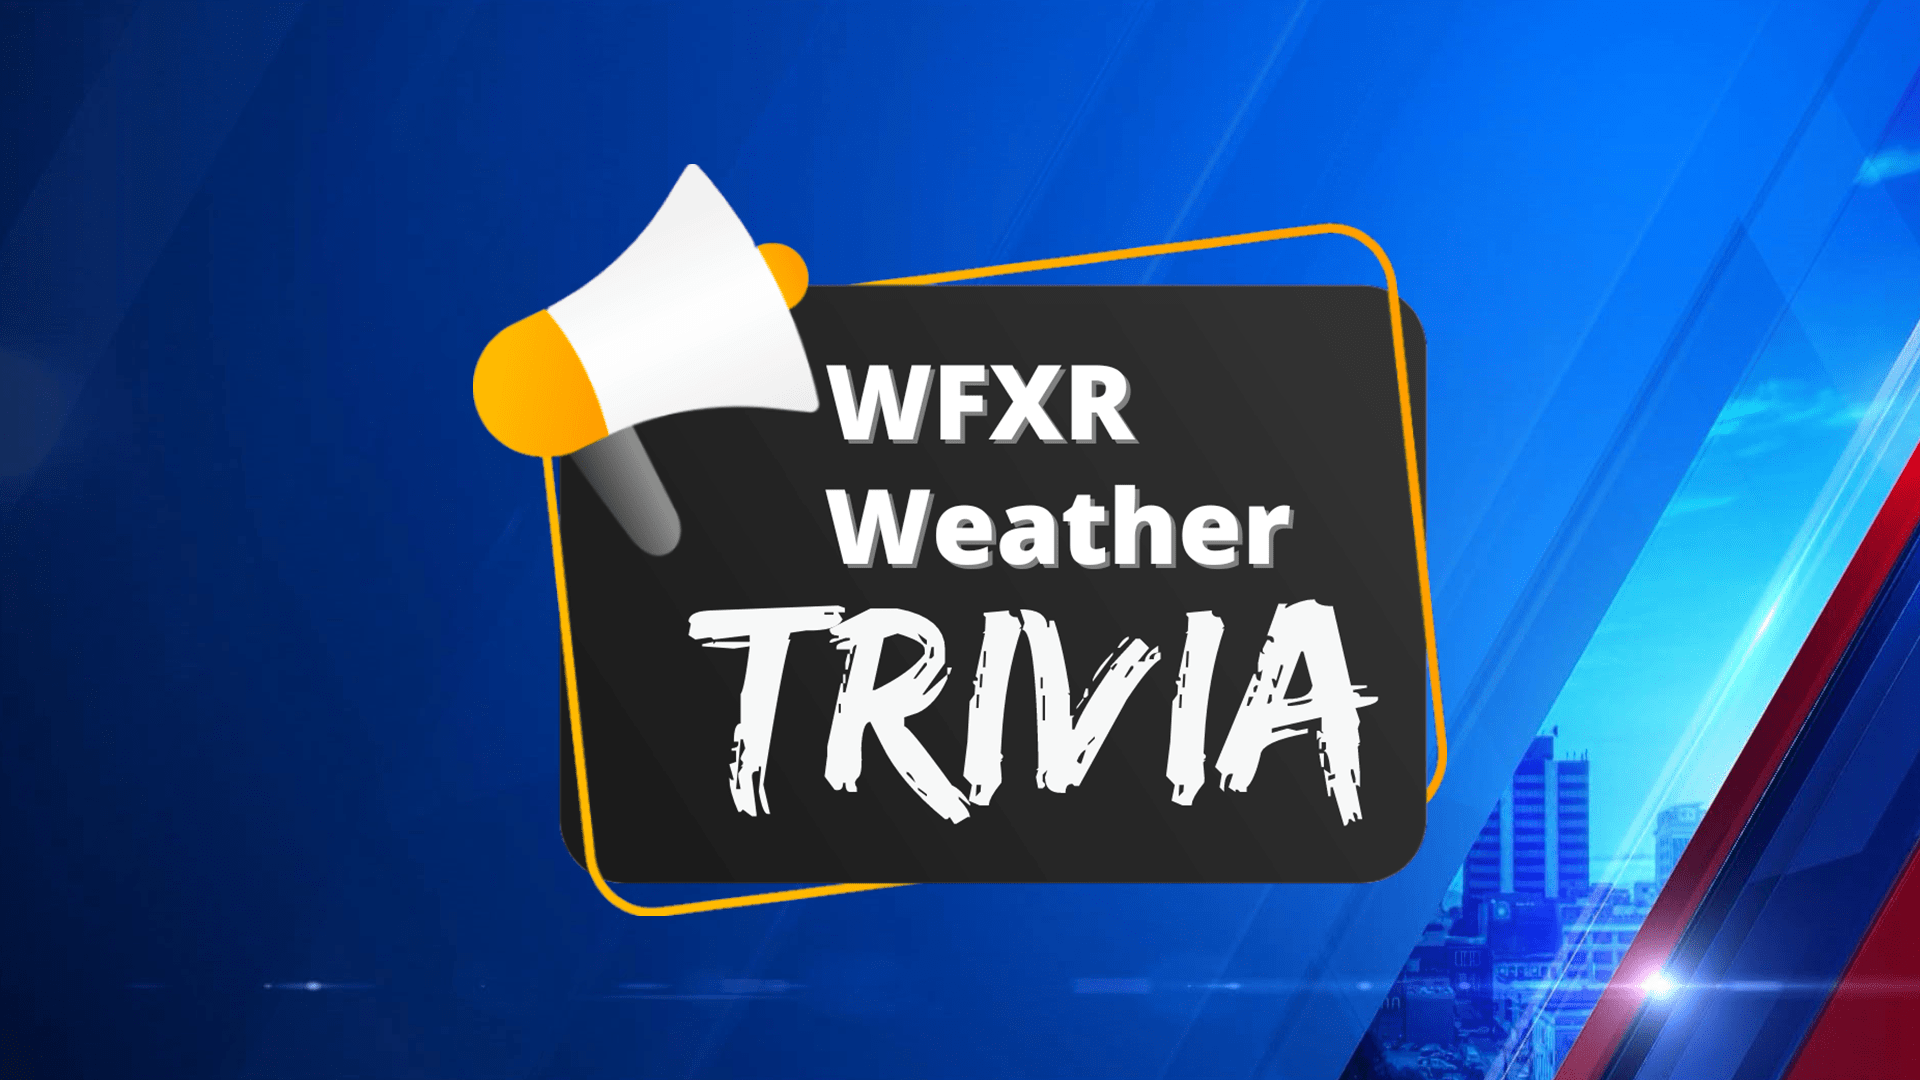 See if you can correctly guess this WFXR Weather Trivia question! What is the warmest June temperature ever recorded in Roanoke?